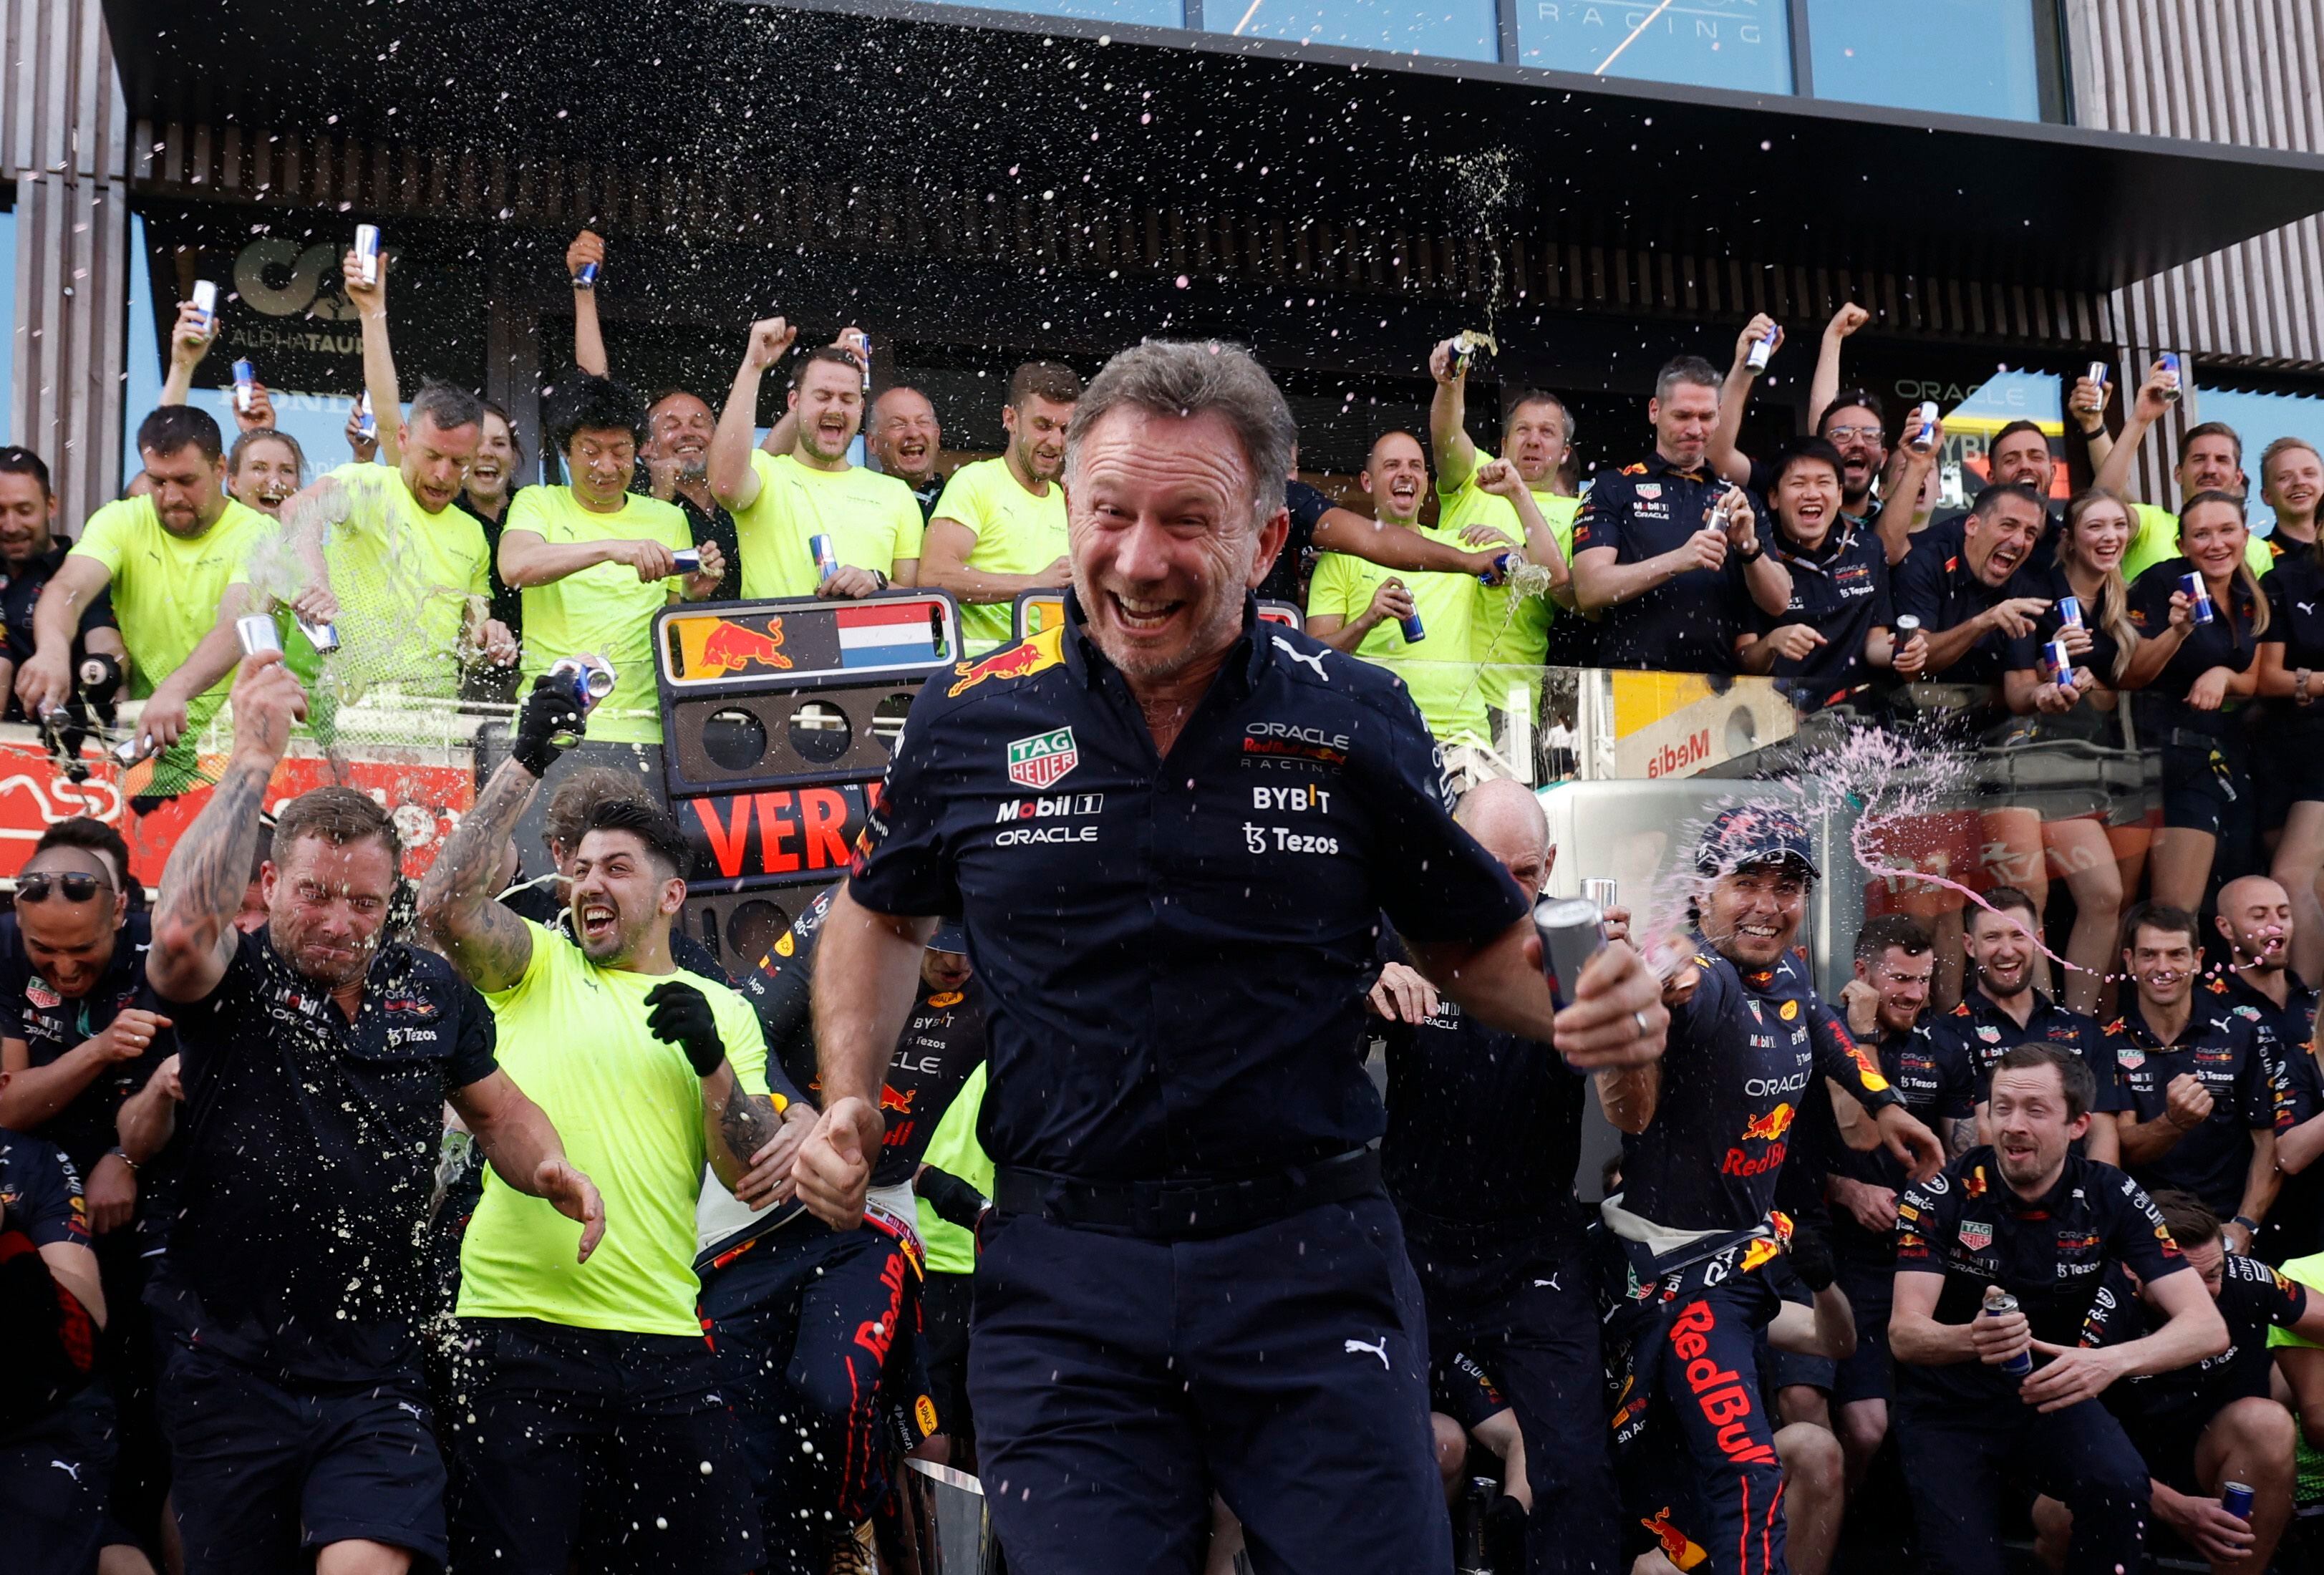 Formula One F1 - Spanish Grand Prix - Circuit de Barcelona-Catalunya, Barcelona, Spain - May 22, 2022 Team principal Christian Horner celebrates with the Red Bull team after drivers Max Verstappen and Sergio Perez finish in first and second place REUTERS/Albert Gea